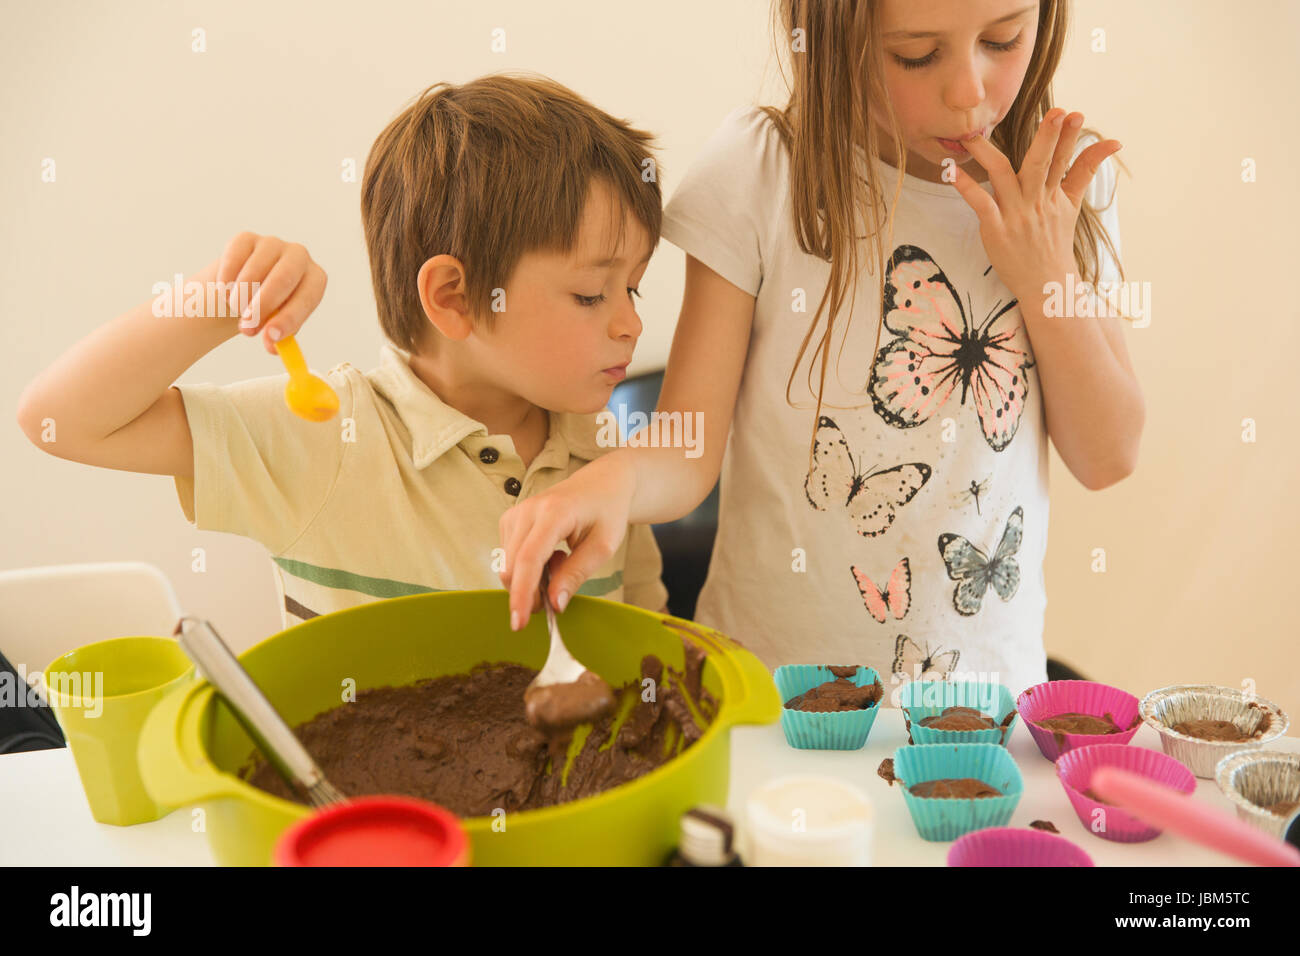 Boy and girl brother and sister making chocolate cupcakes, licking fingers Stock Photo